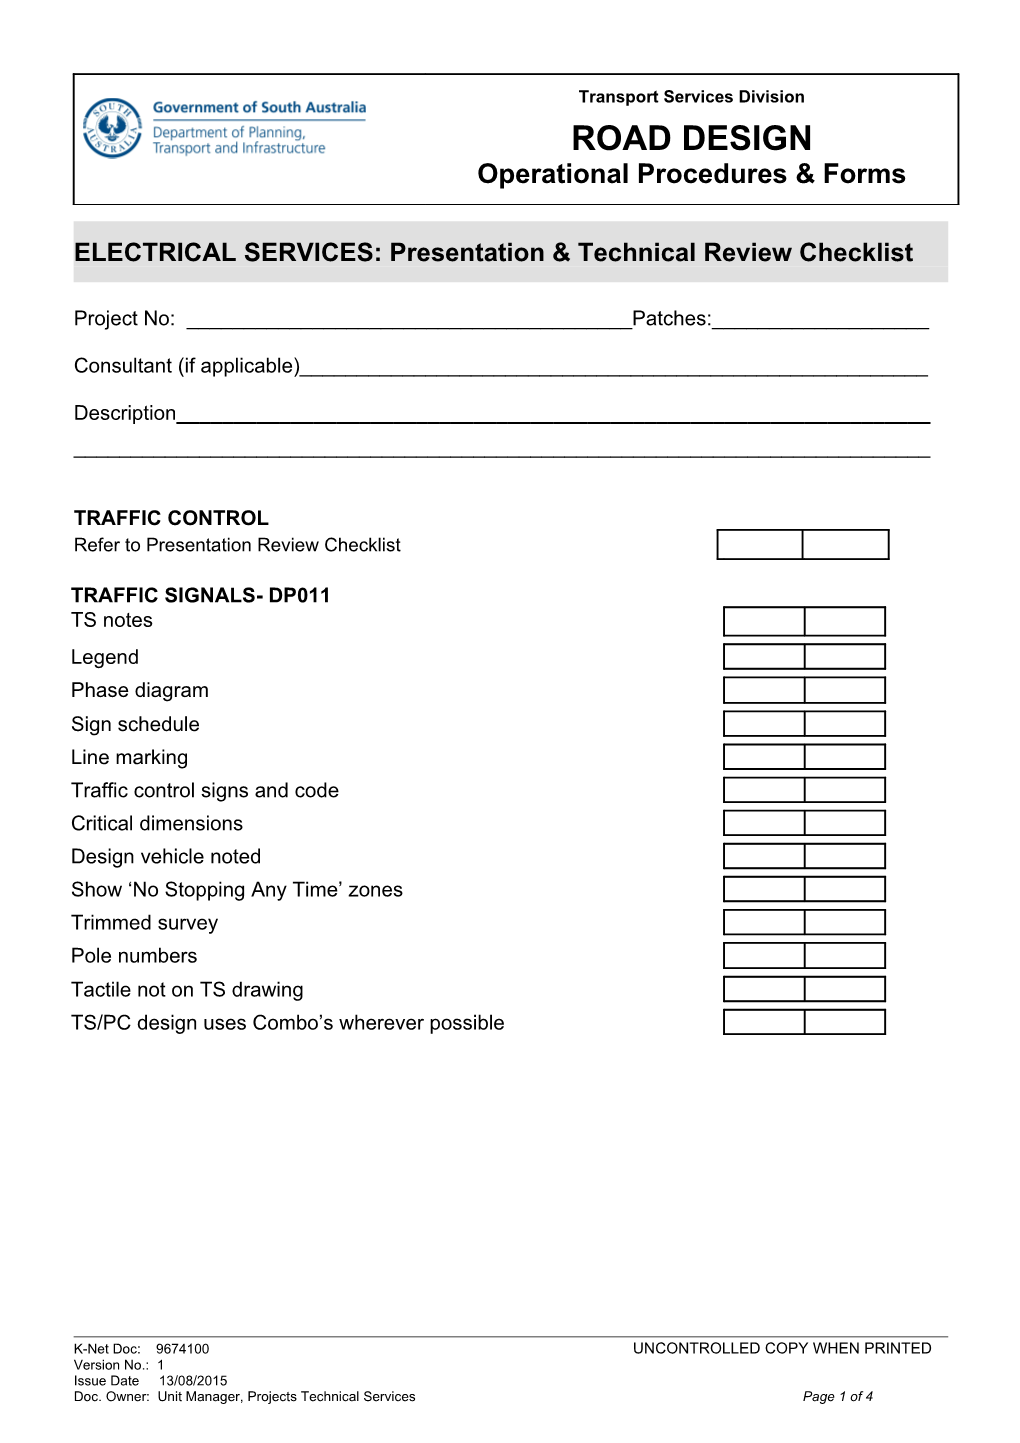 ELECTRICAL SERVICES: Presentation & Technical Review Checklist